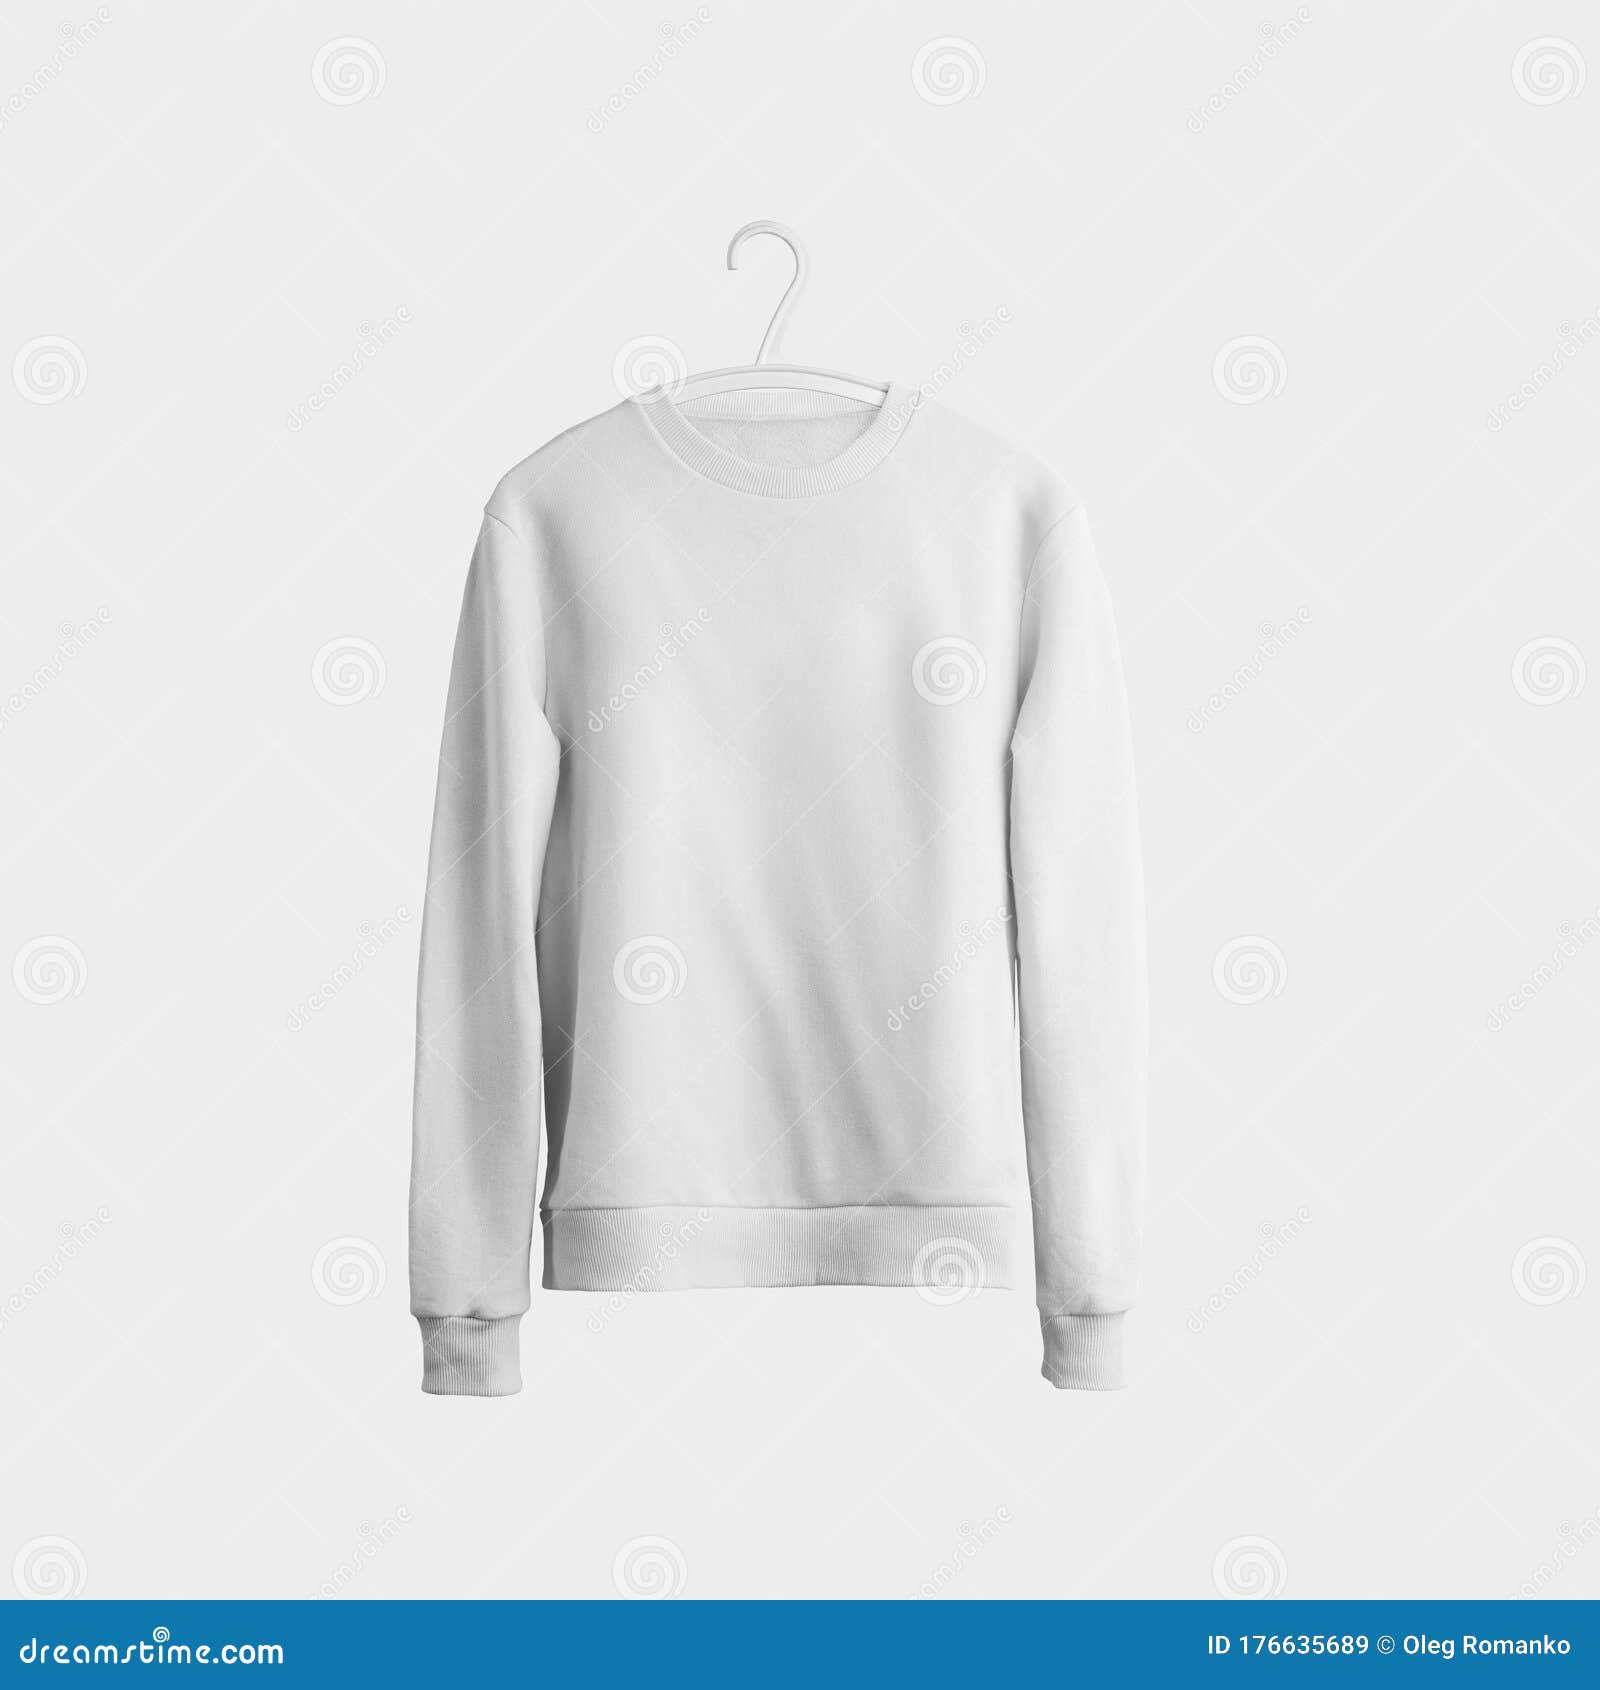 Download Mockup Of A Male White Heather Hanging On A Hanger, Front ...